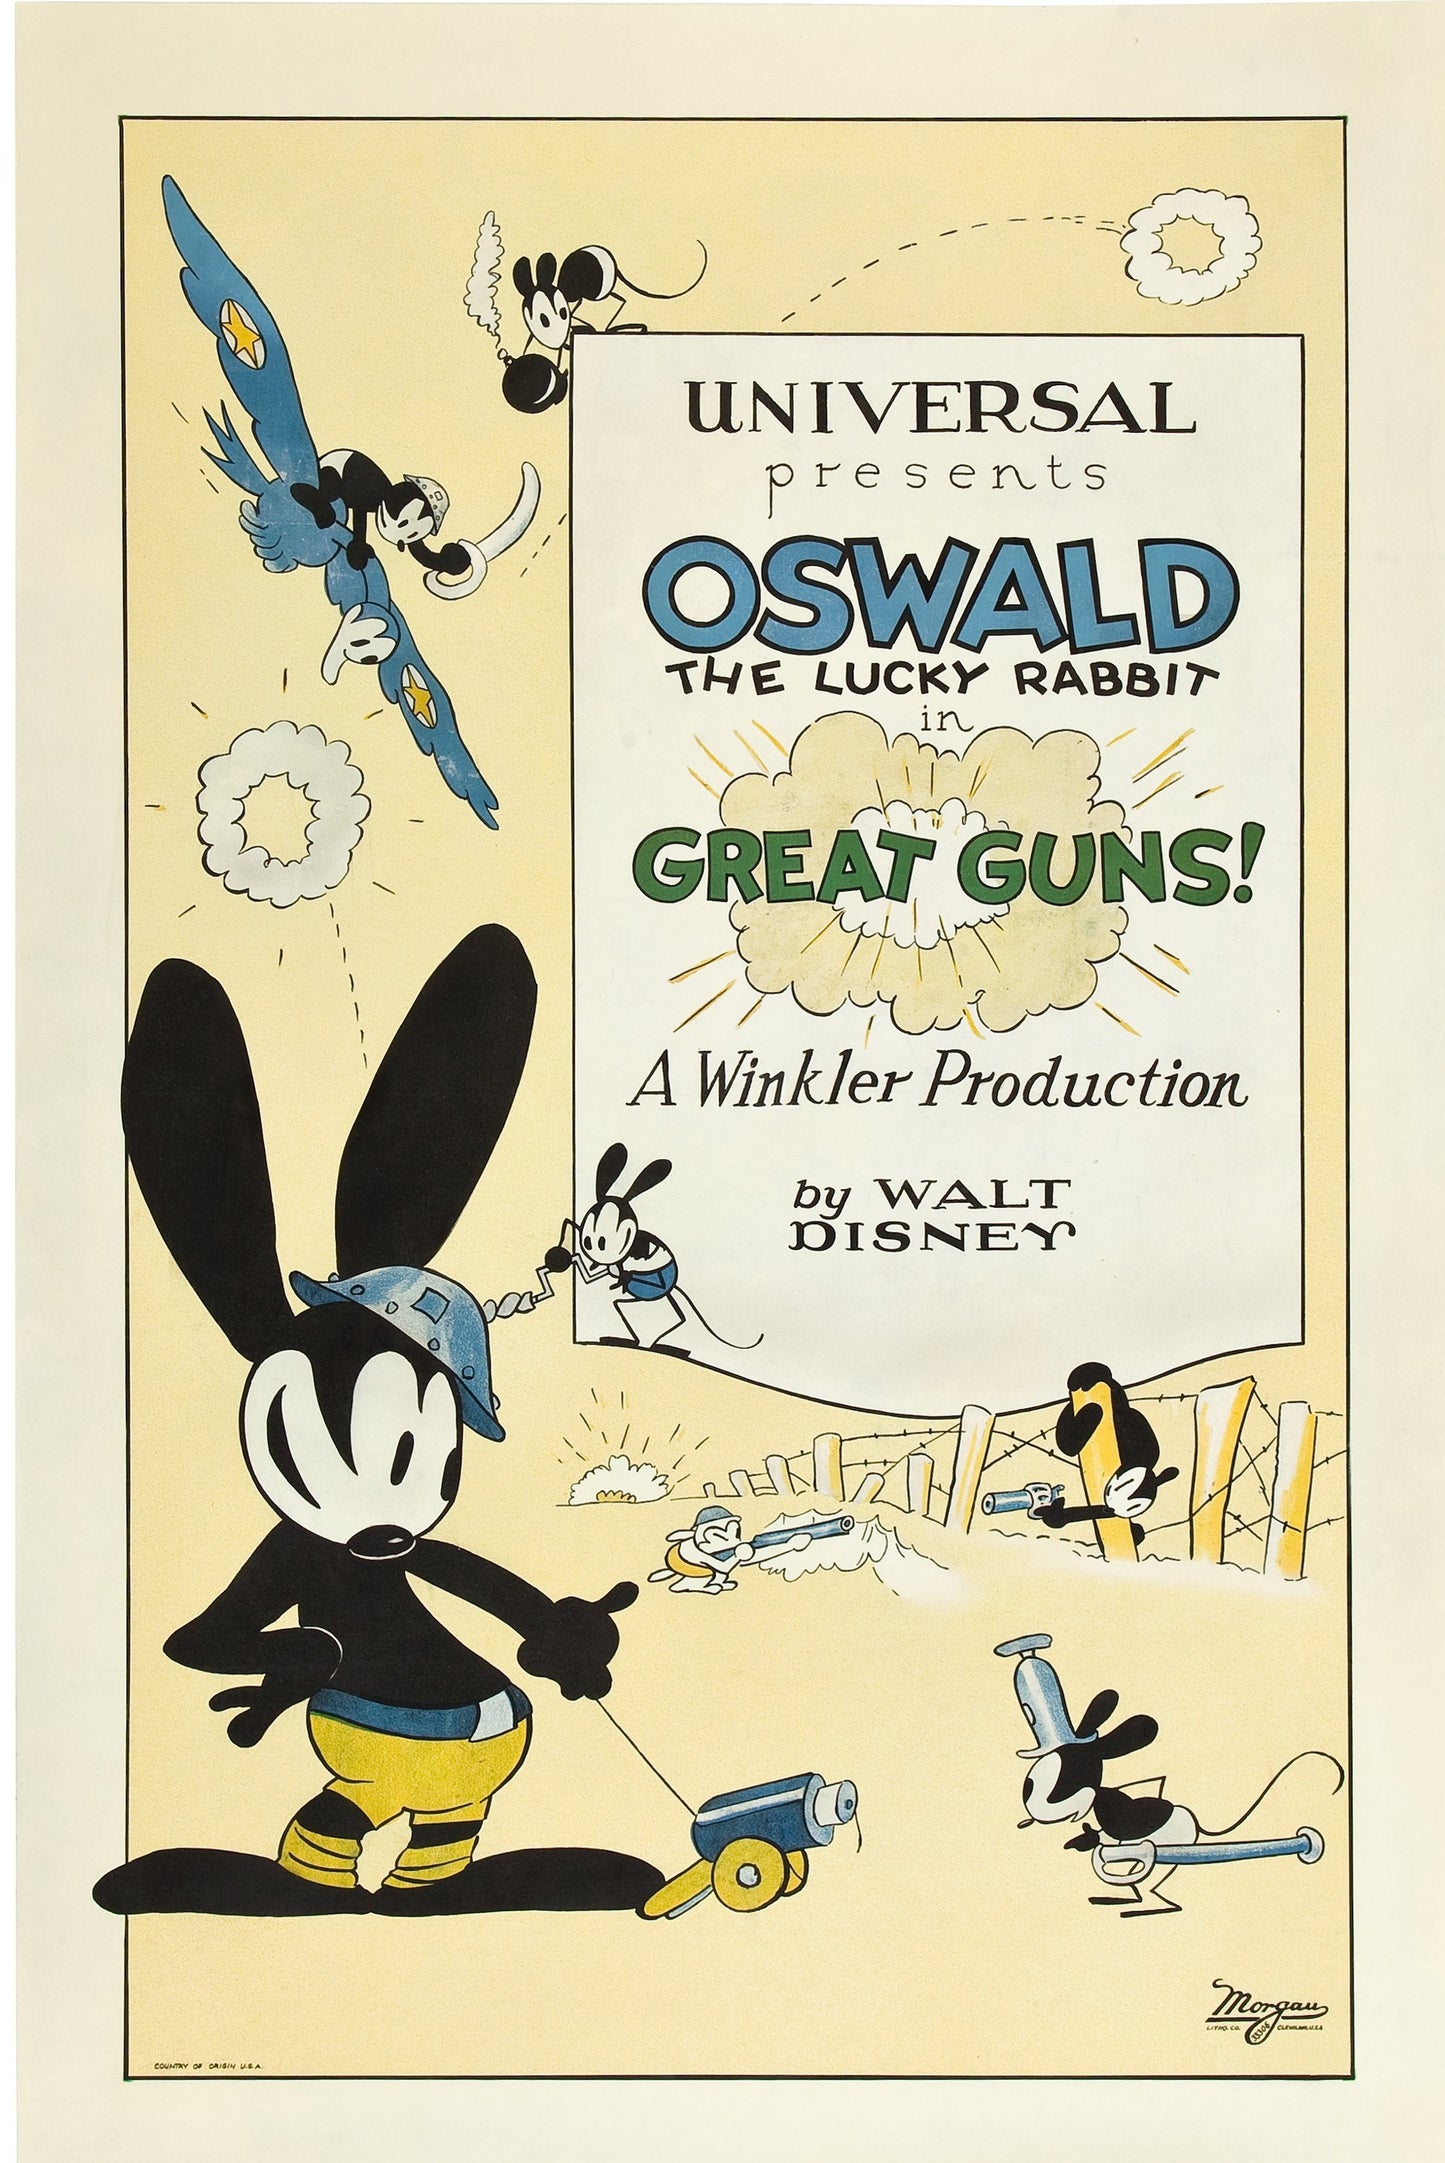 Oswald the lucky rabbit "Great Guns" (1920s) | Walt Disney Old Cartoon Movies | Vintage posters Posters, Prints, & Visual Artwork The Trumpet Shop Vintage Prints   